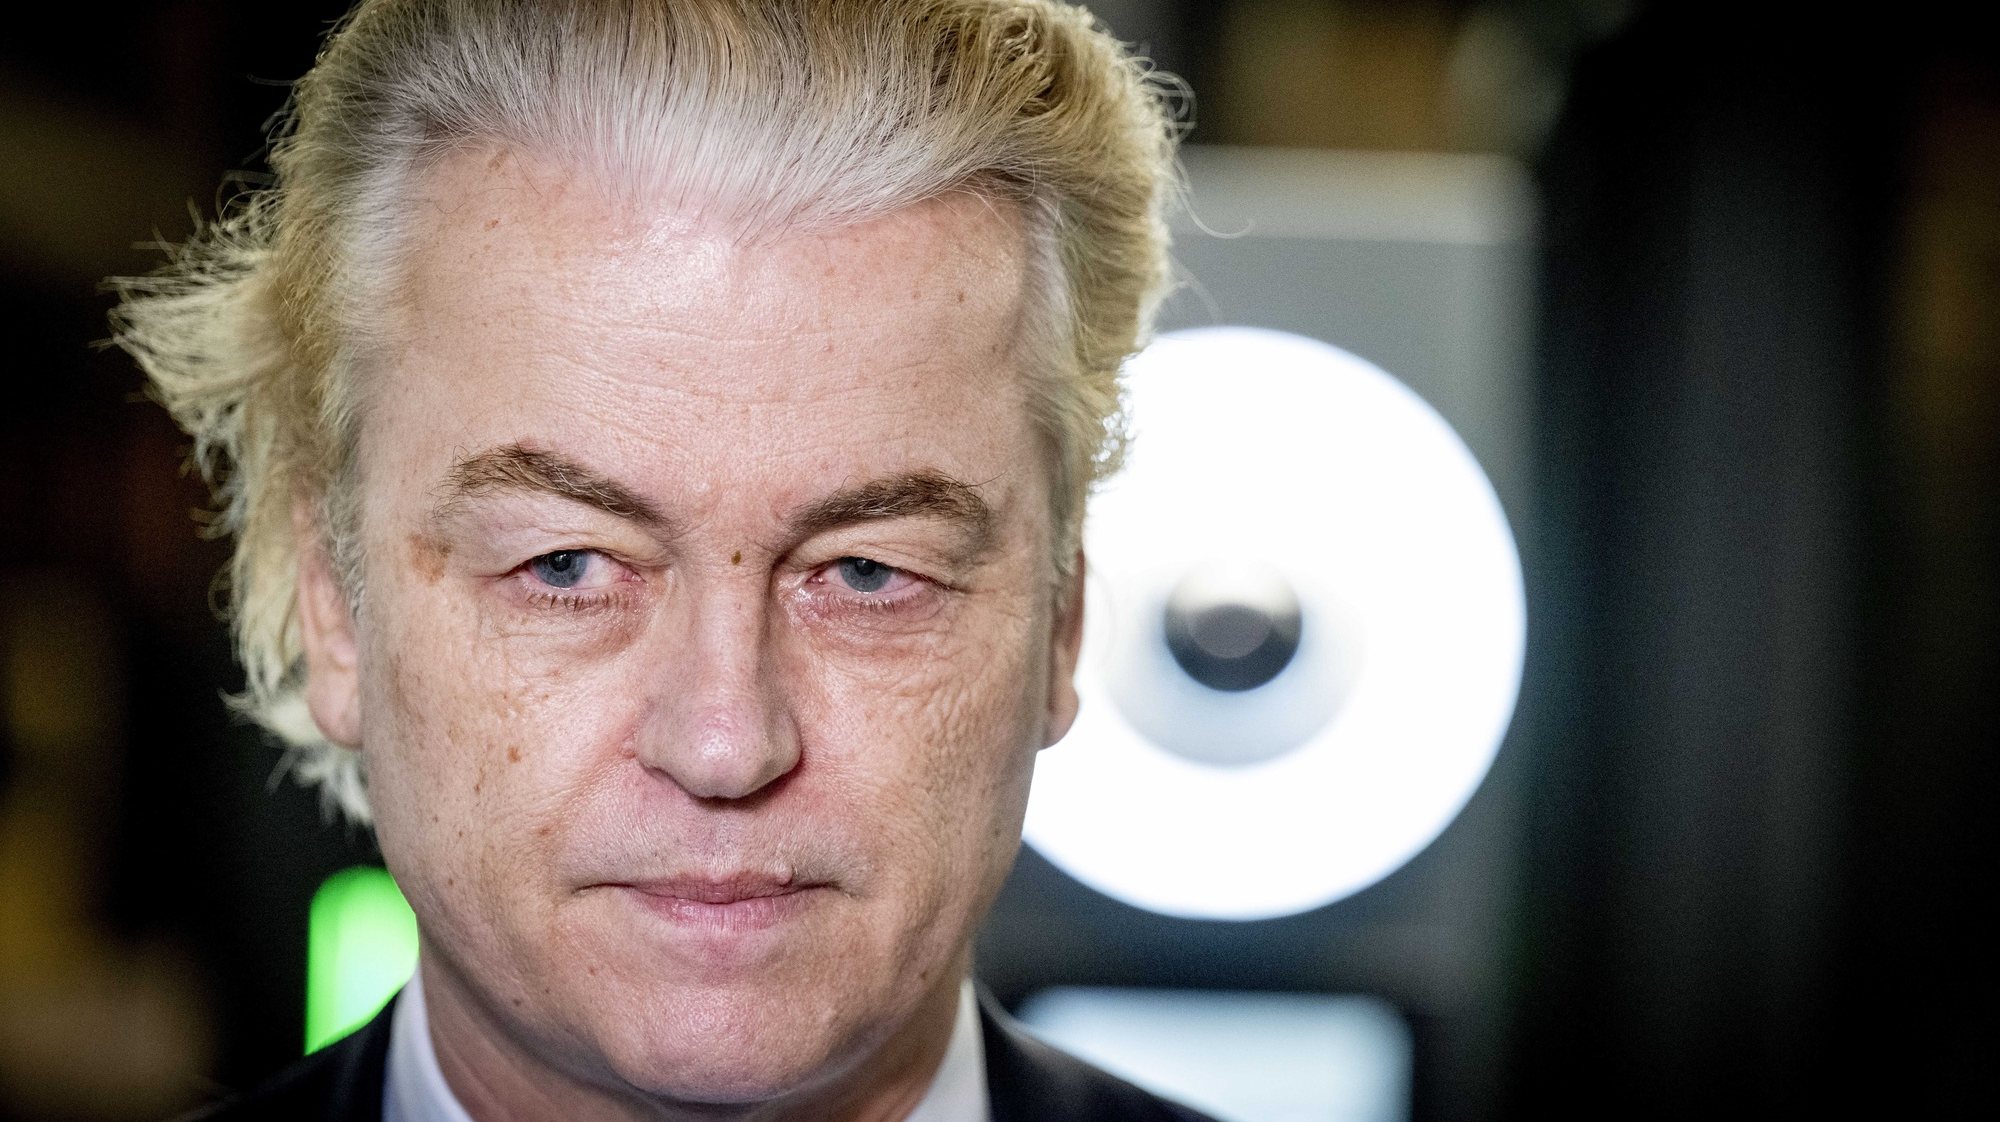 Agreement reached for a coalition government in the Netherlands